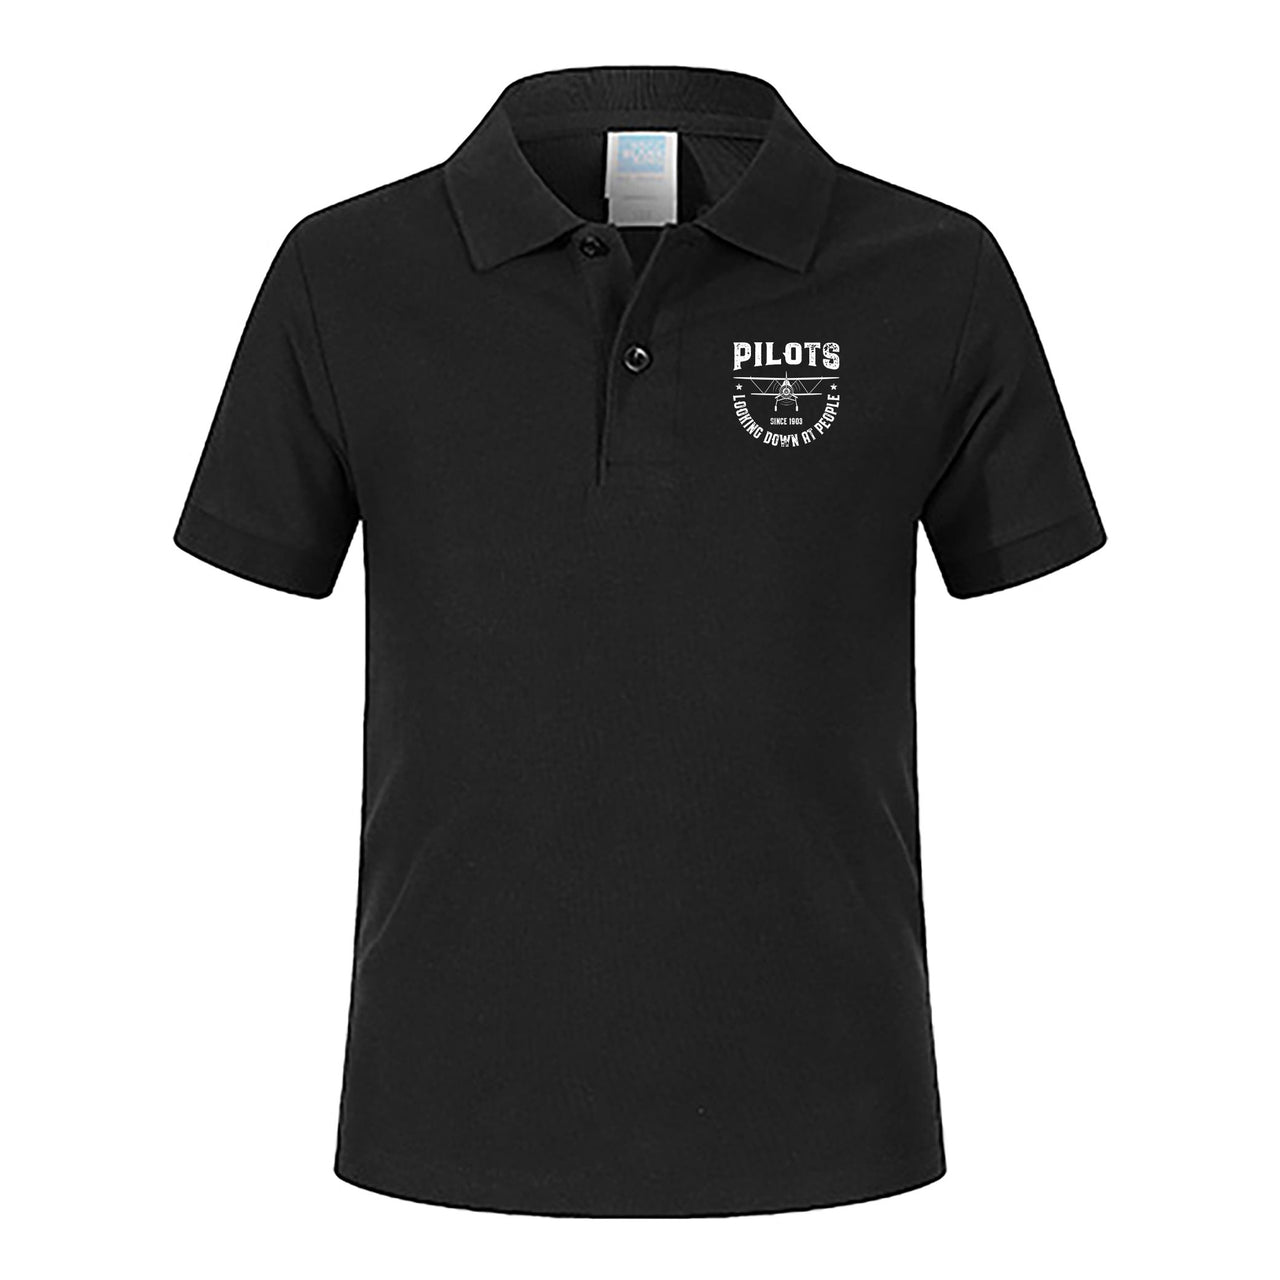 Pilots Looking Down at People Since 1903 Designed Children Polo T-Shirts